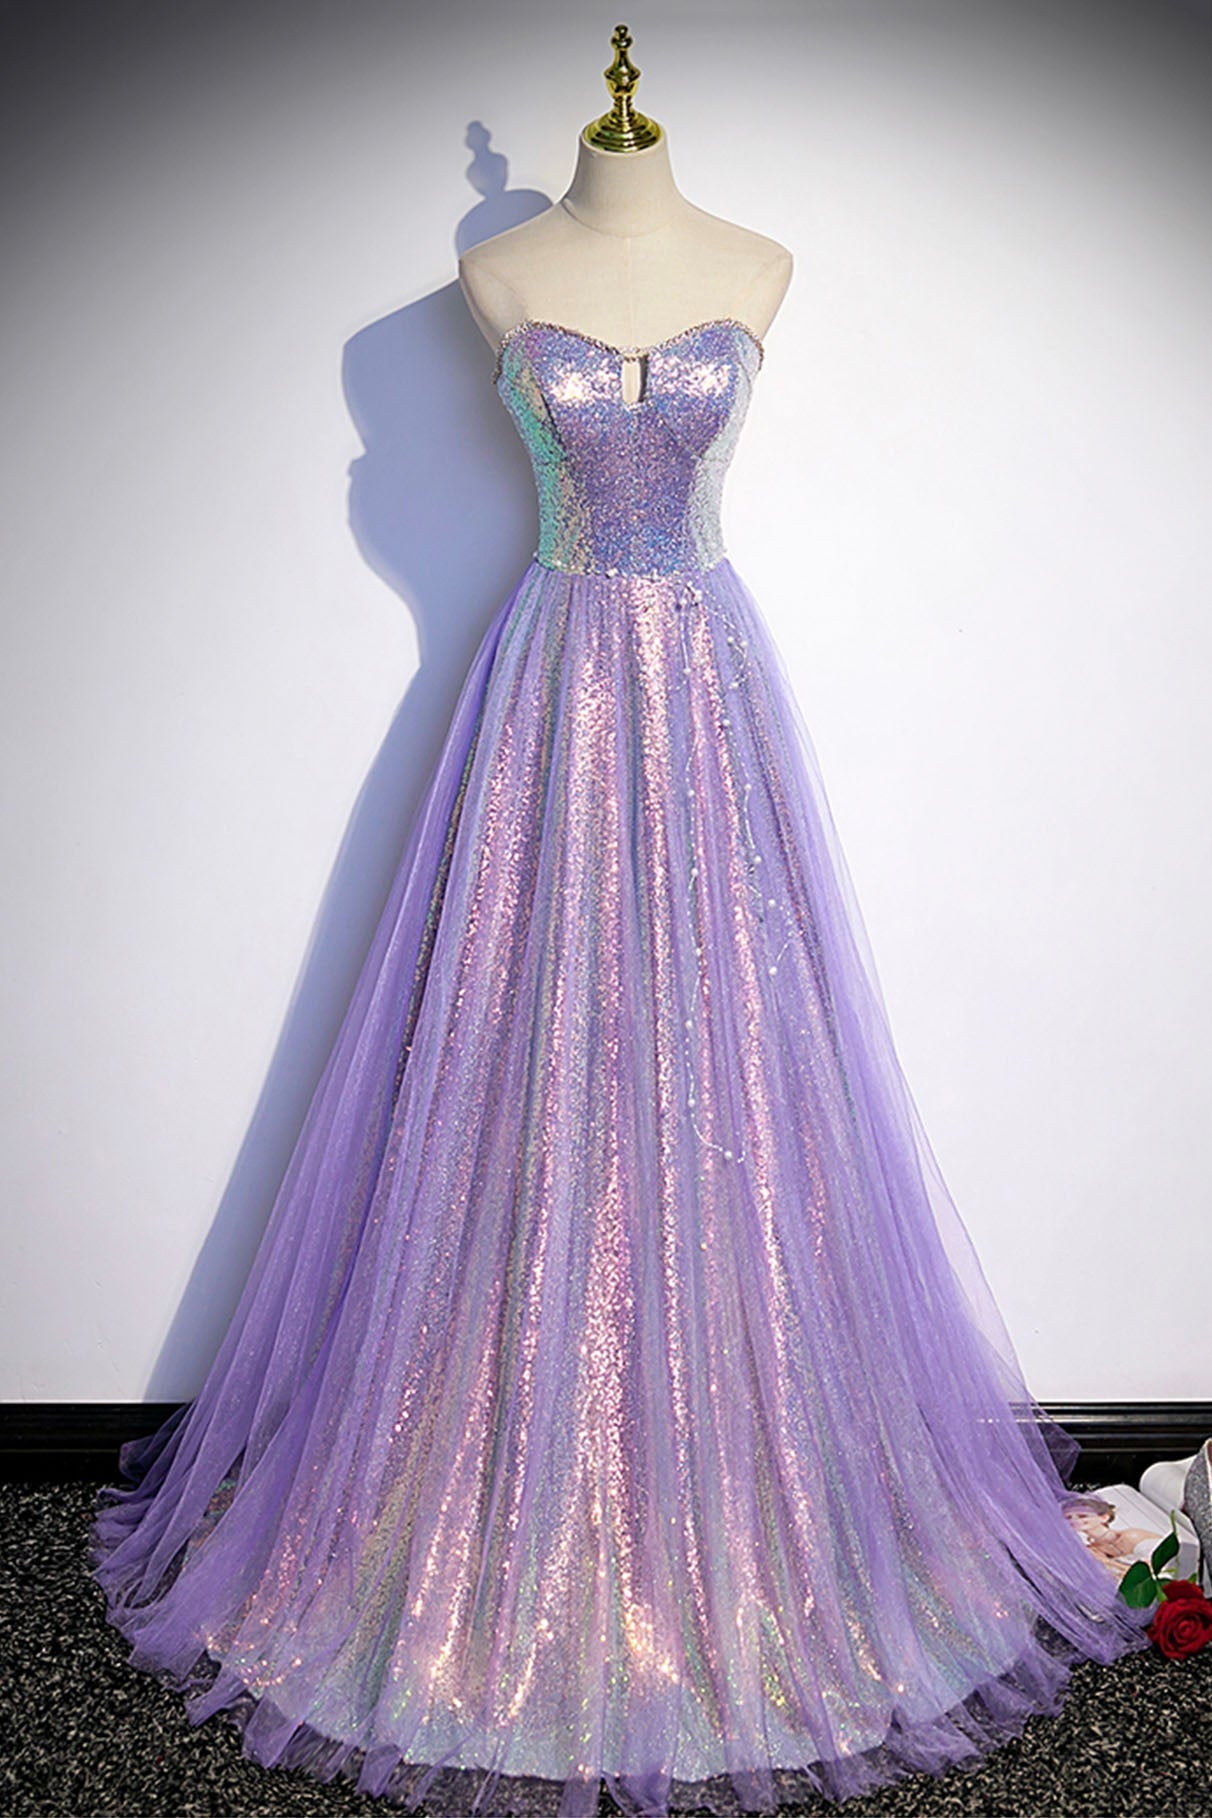 Purple Strapless Sequins Floor Length Corset Prom Dress, A-Line Corset Formal Dress outfit, Fall Wedding Color